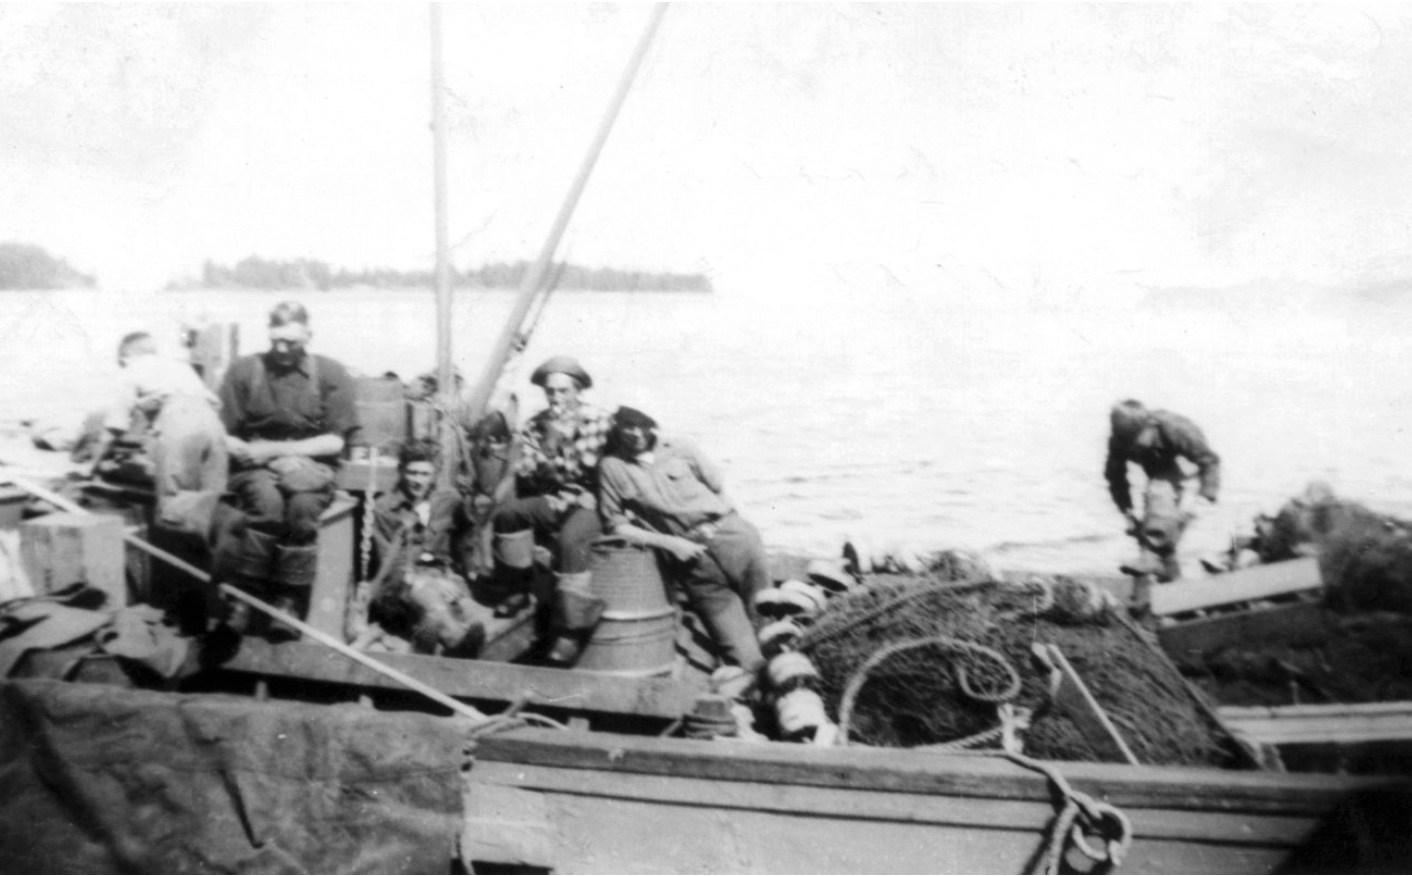 Deck of a boat with five men, nets, and other equipment